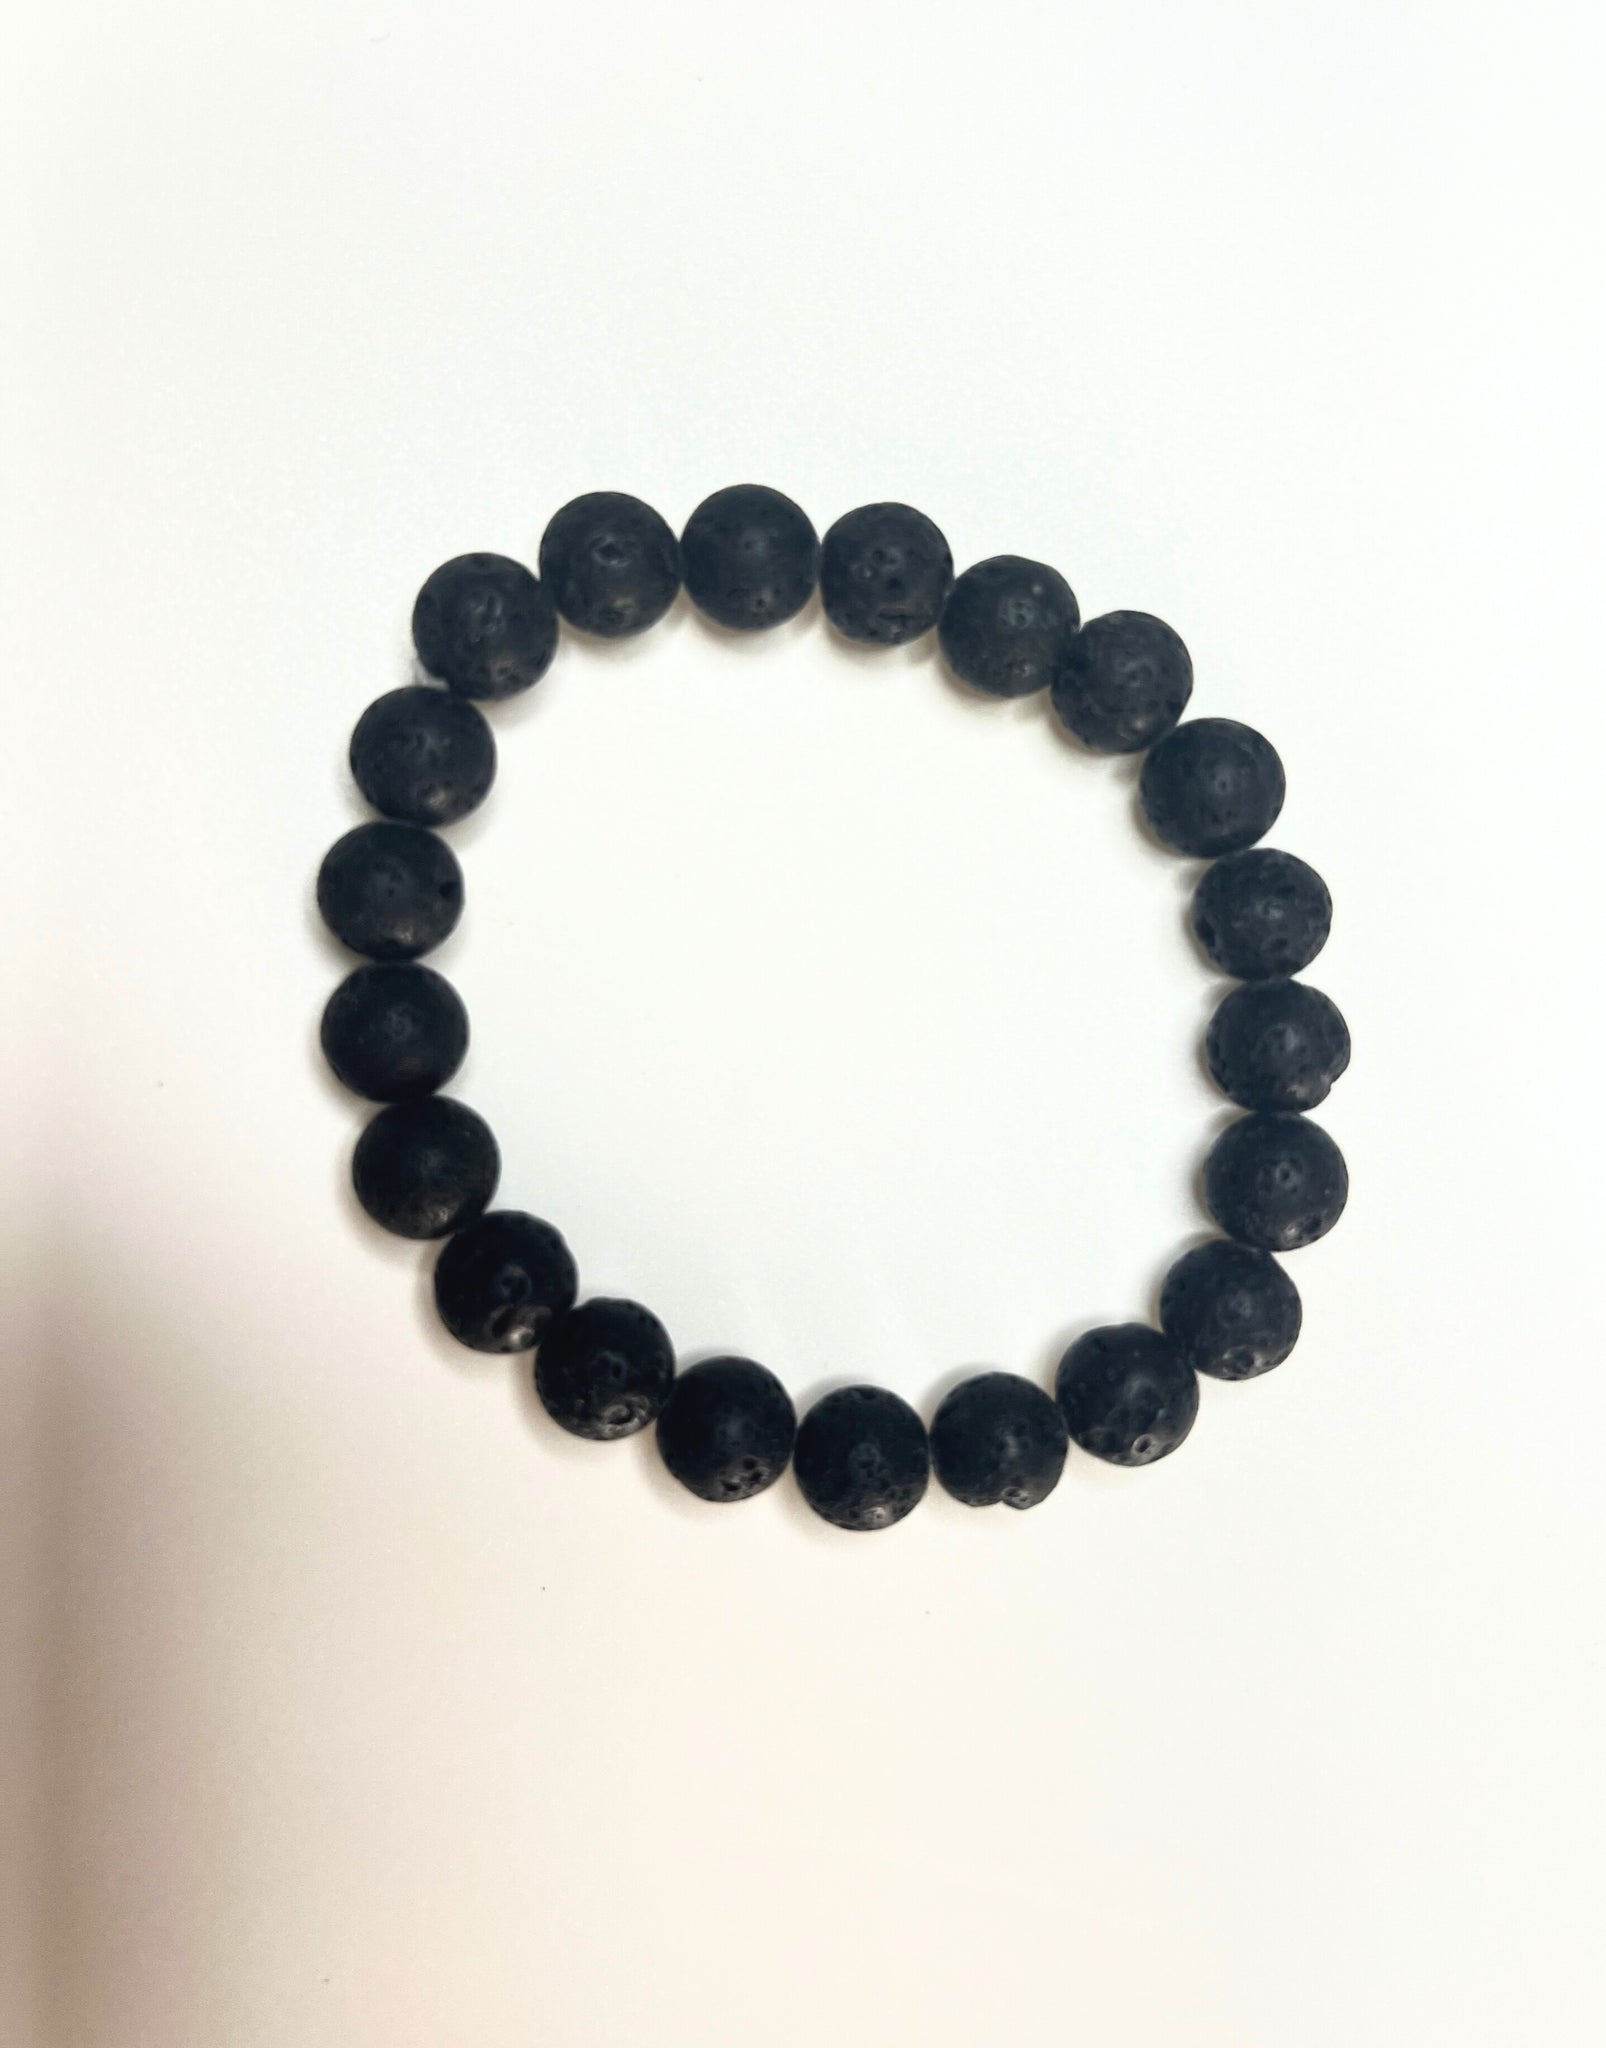 Buy Shubhanjali Black Obsidian 8 mm Natural Buddha Crystal Healing Stone 21  Beads Bracelet for Men and Women (Free Size) at Amazon.in